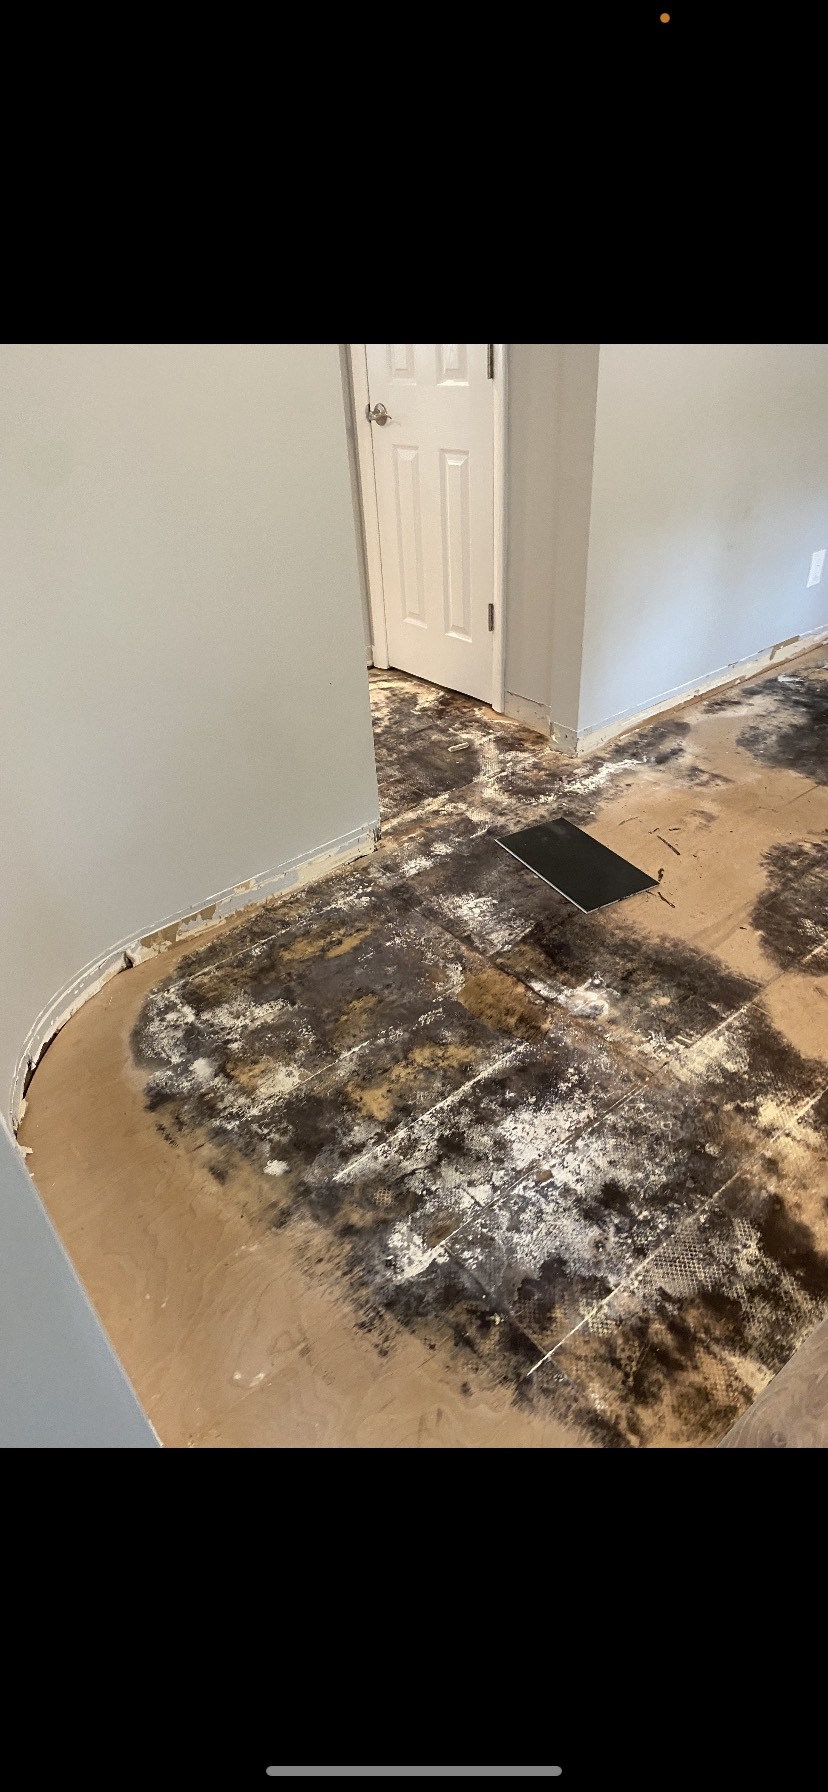 Mold that covers more than a small area typically needs to be dealt with by a professional.